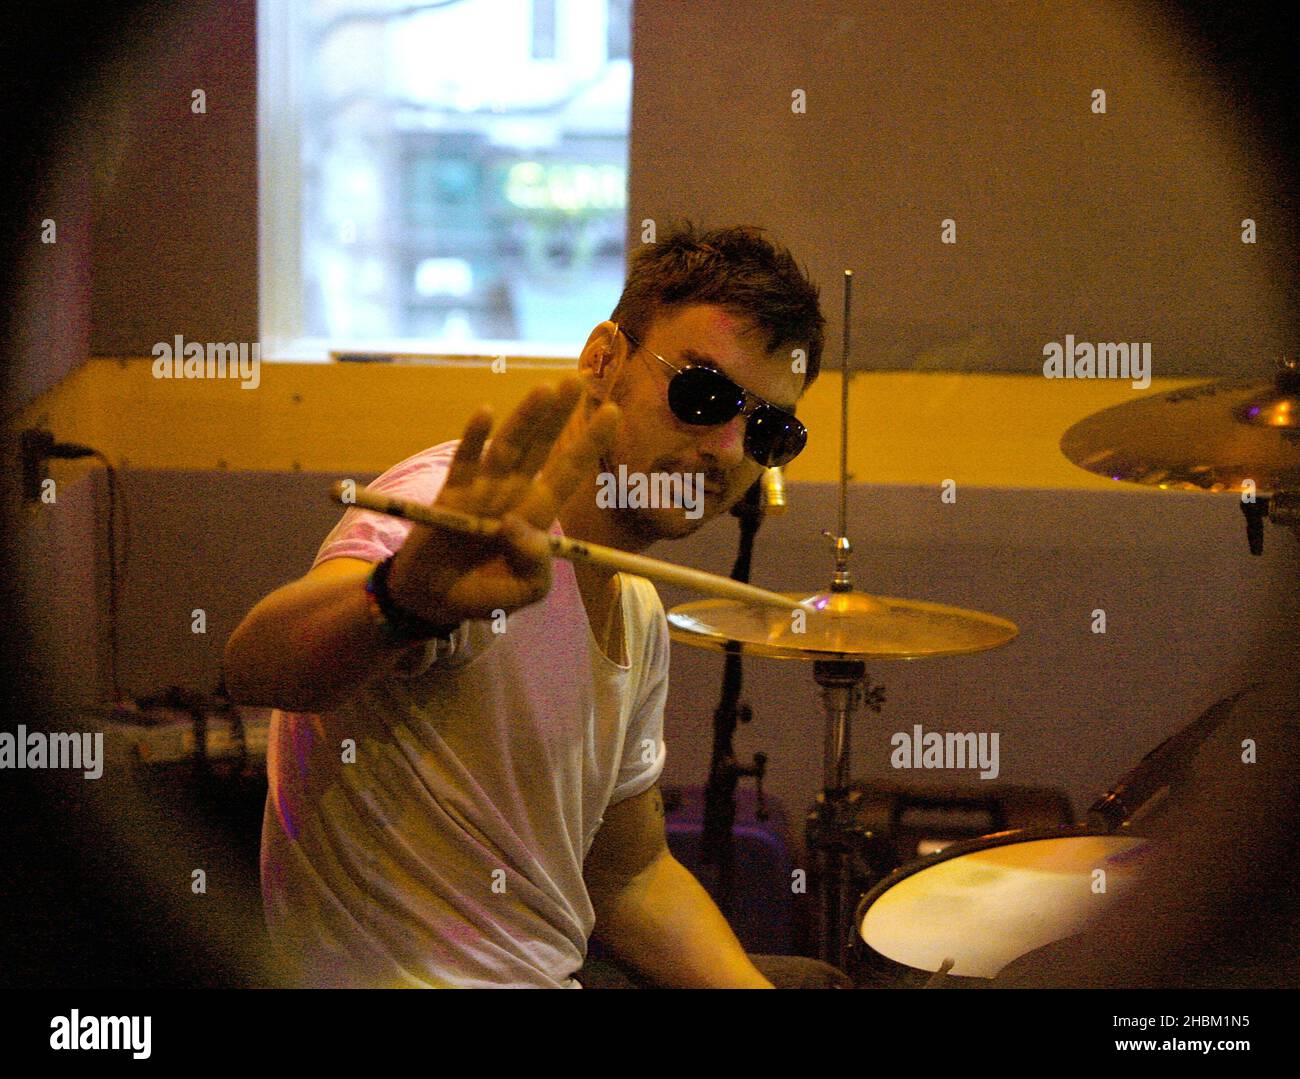 Shannon Leto and his band 30 Seconds to Mars perform at XFM on March 29, 2010. Stock Photo